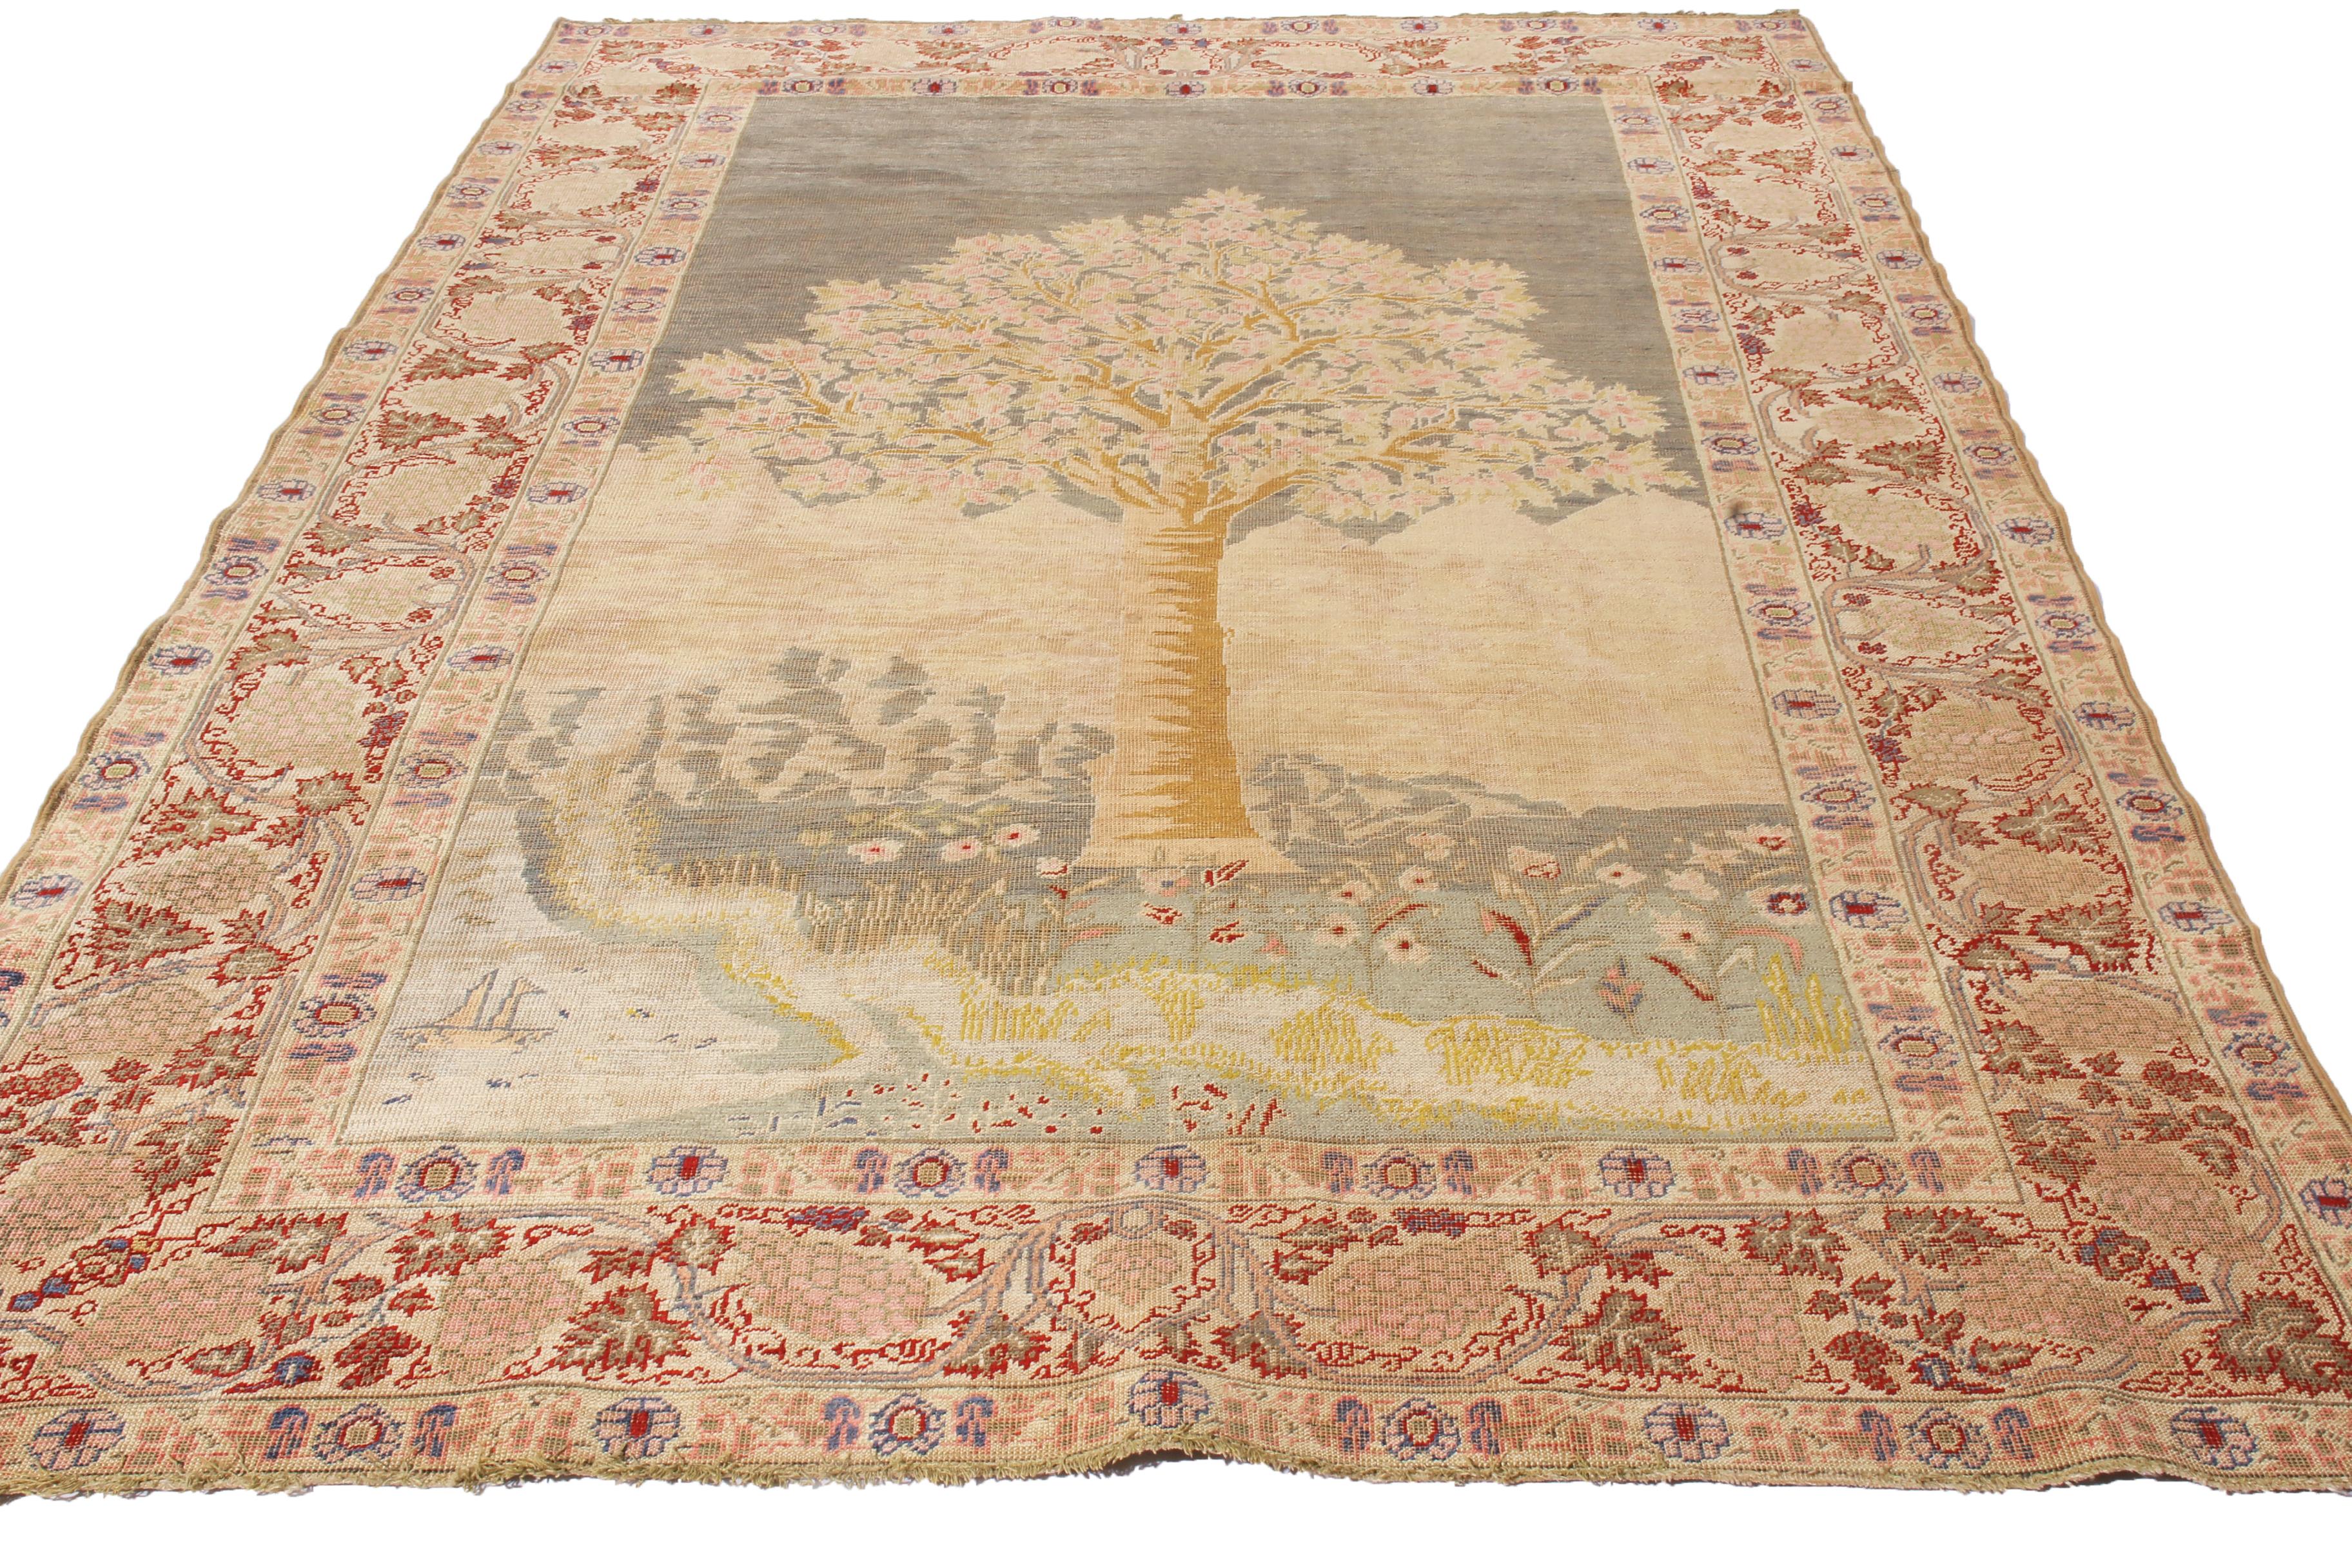 Originating from Turkey in 1910, this antique Kayseri rug enjoys a realist, one-sided field design with a variety of floral patterns in the mirrored borders. Hand knotted in durable wool pile, the nature setting depicting a lone, stylistic tree in a